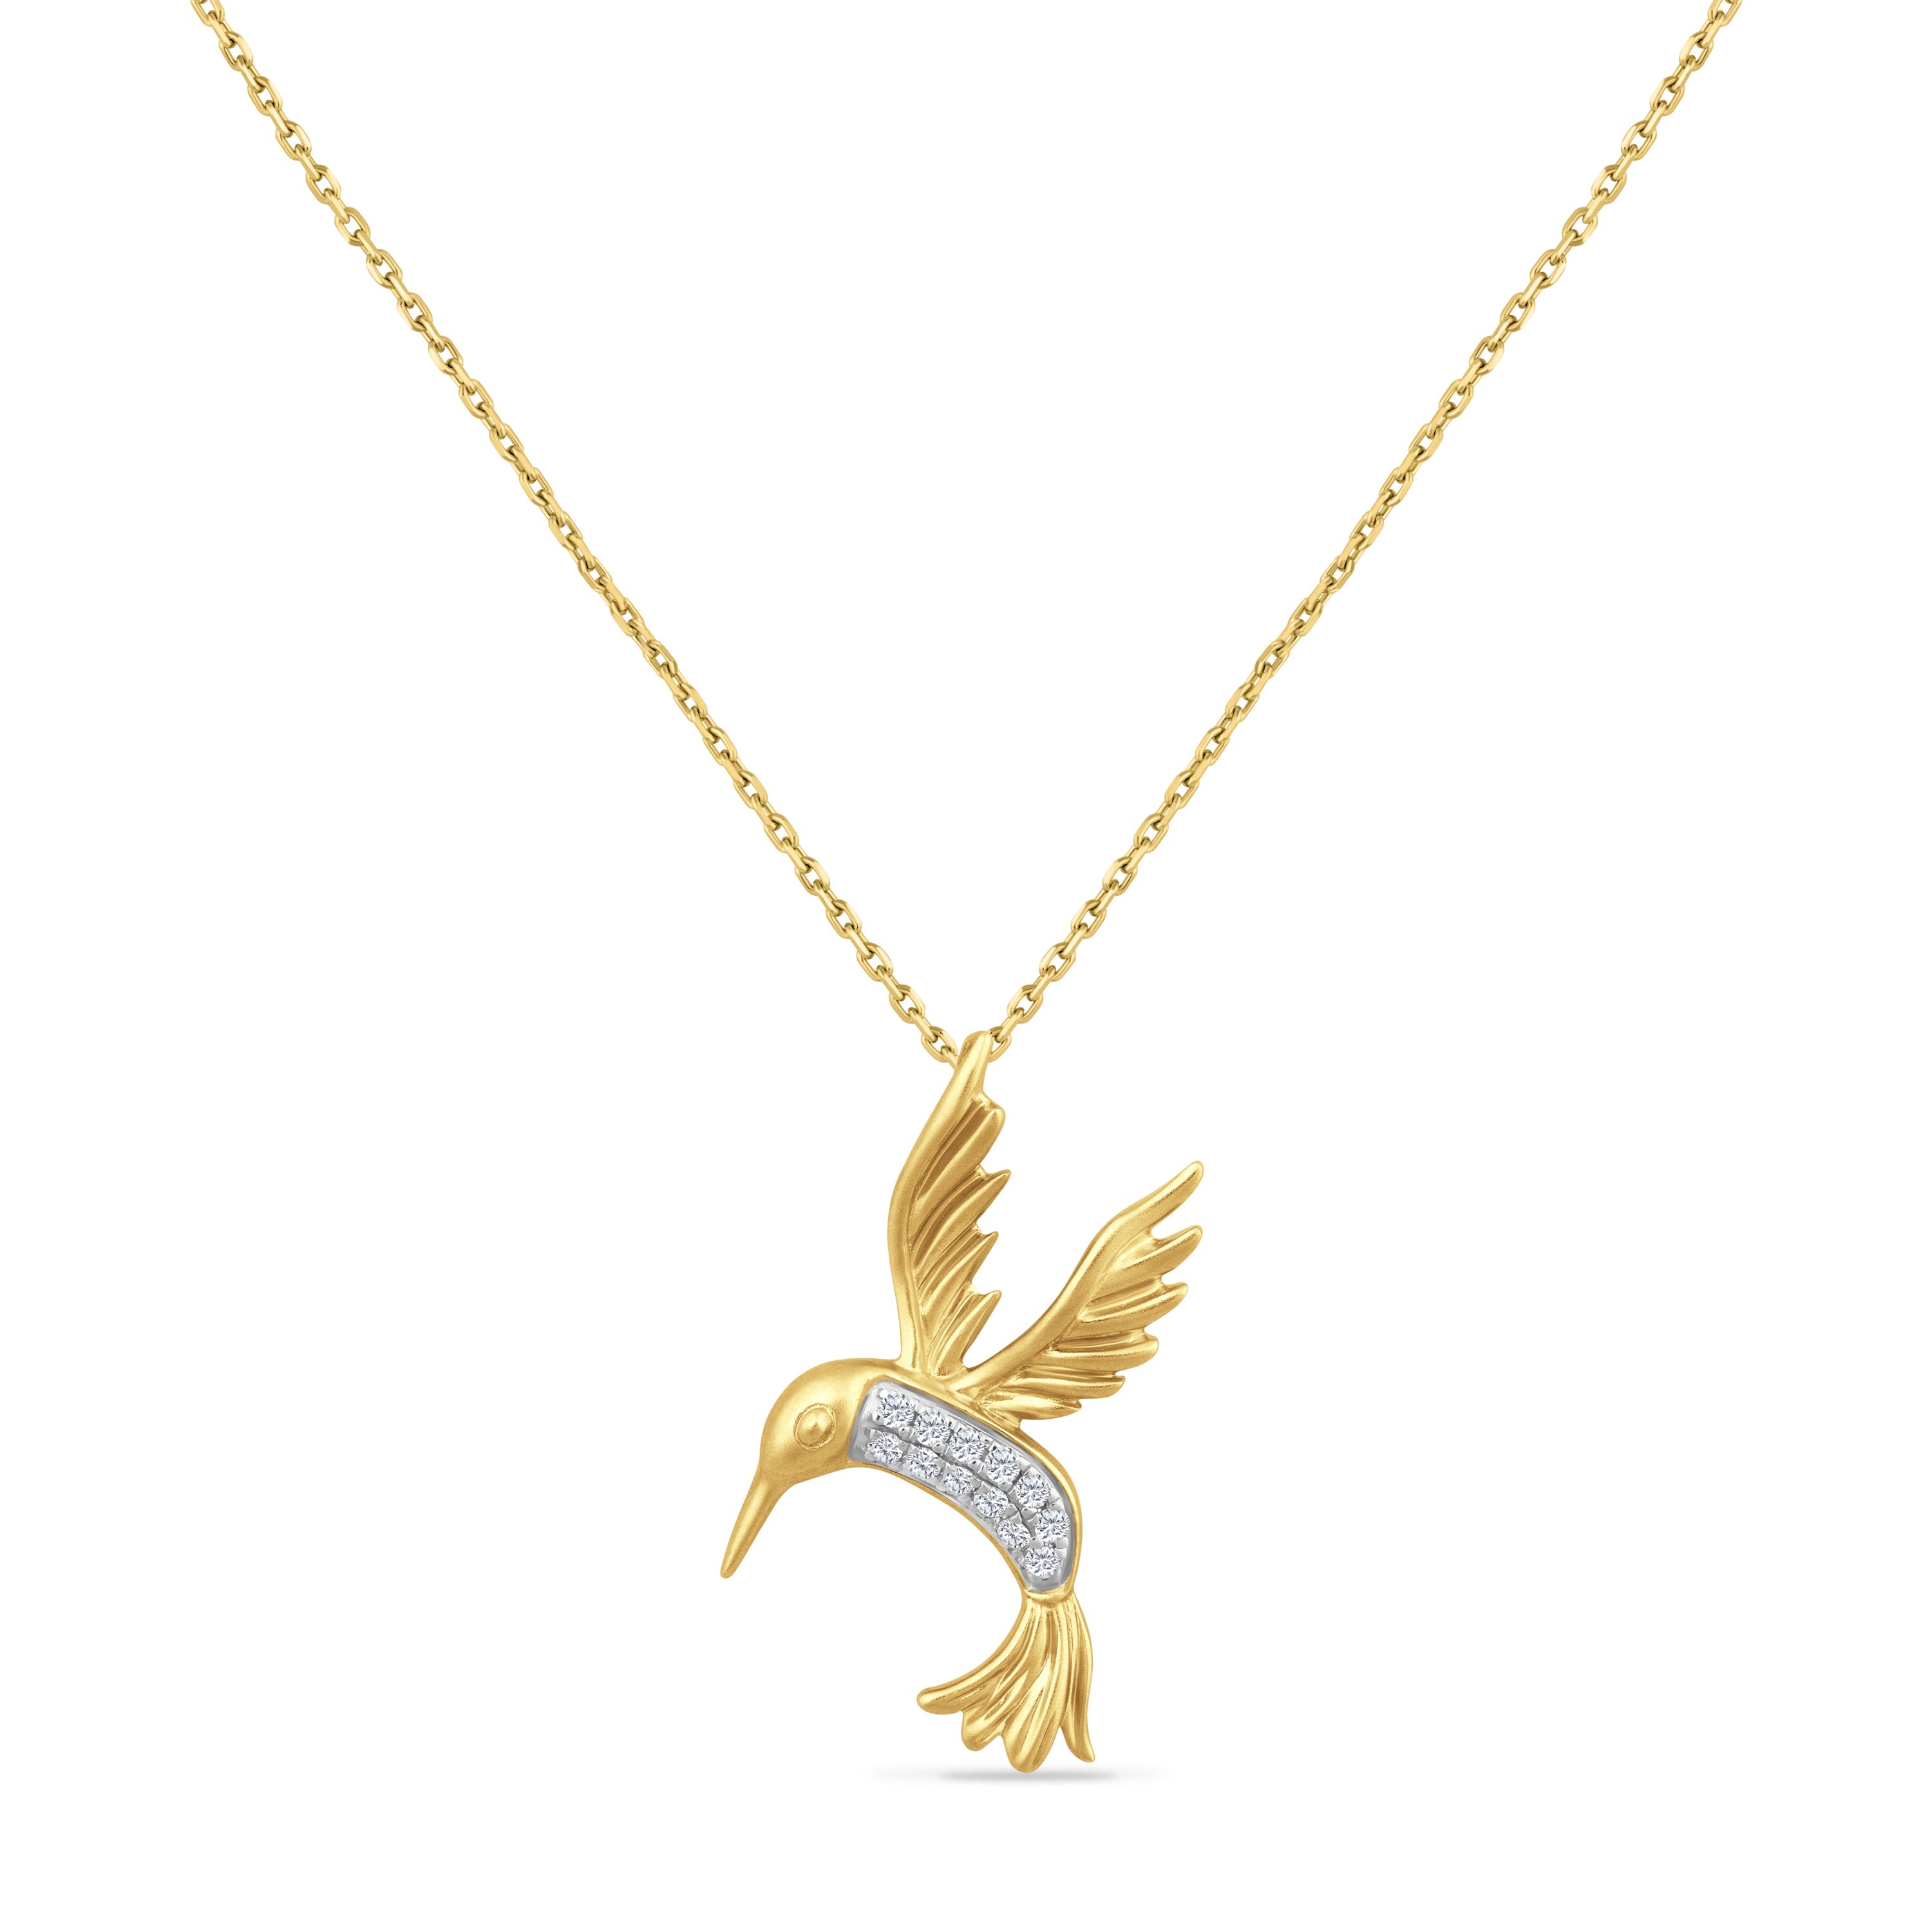 14K HUMMINGBIRD PENDANT WITH 12 DIAMONDS 0.12CT ON 18 INCHES CABLE CHAIN